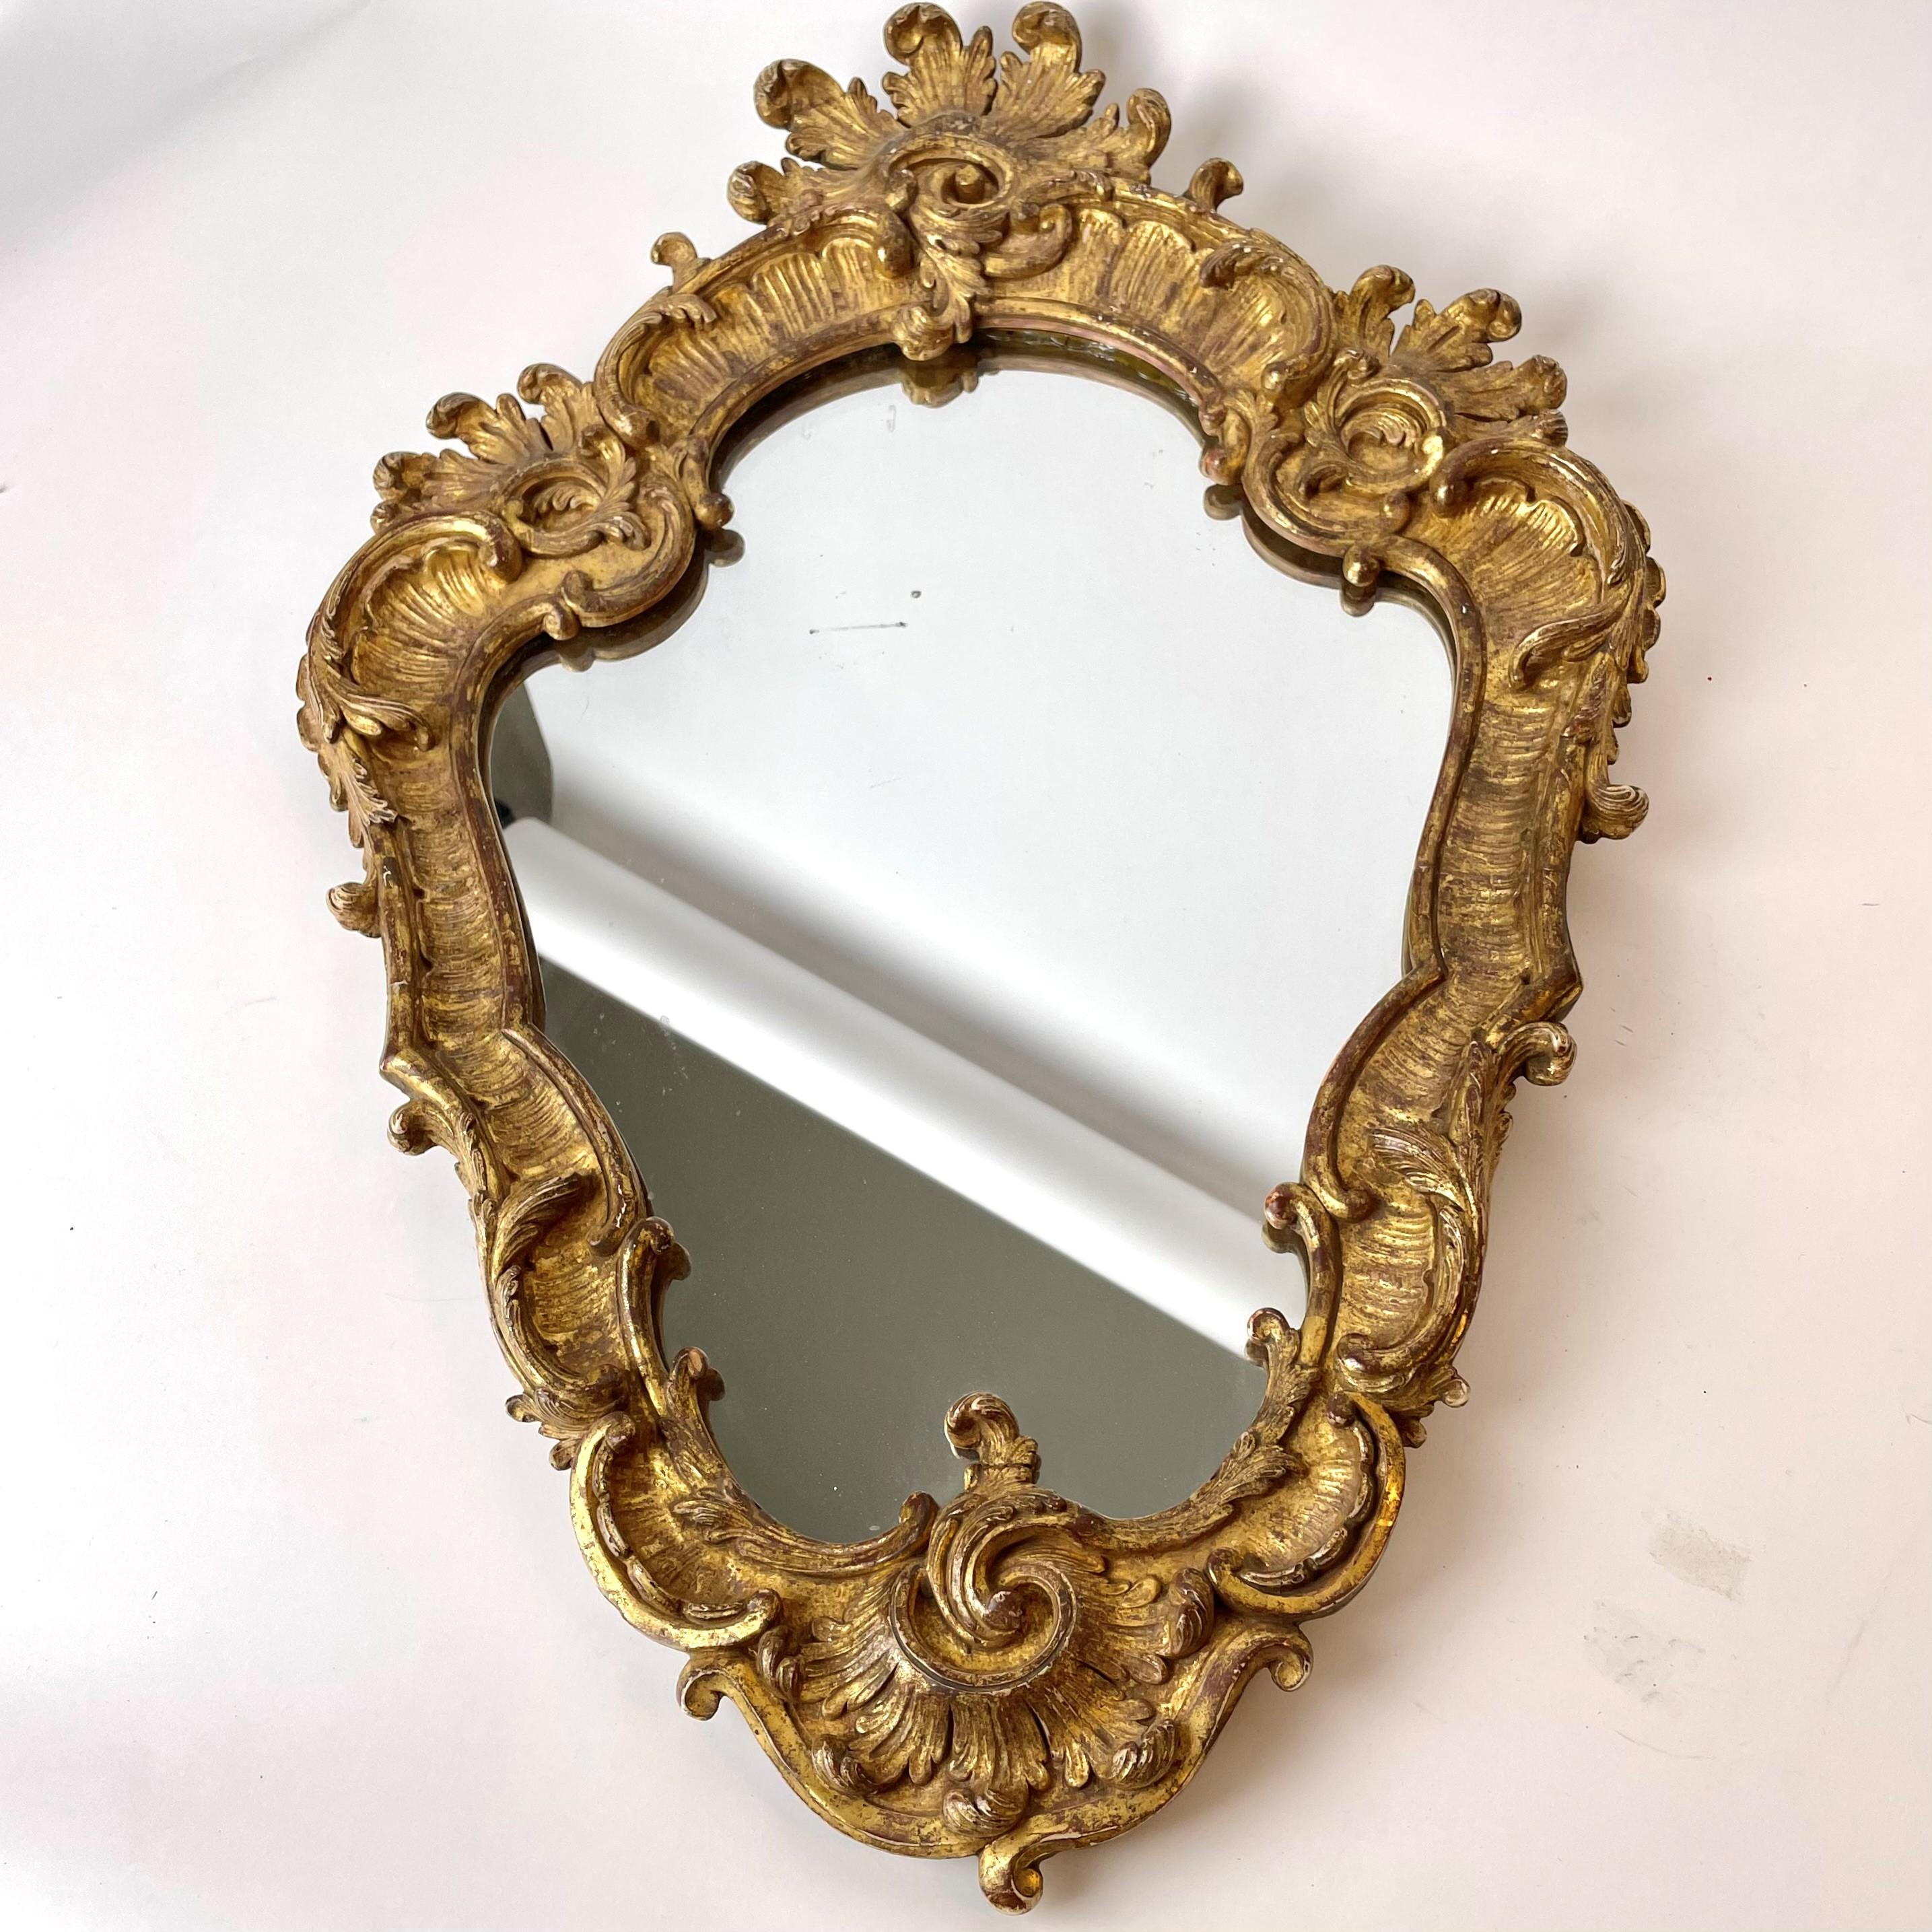 Very elegant French Rococo Mirror with original gilding. Probably made in Paris, France around the middle of the 18th Century.

Beautiful original gilding with nice patina. The mirror glass is probably also original glass.

Wear consistent with age